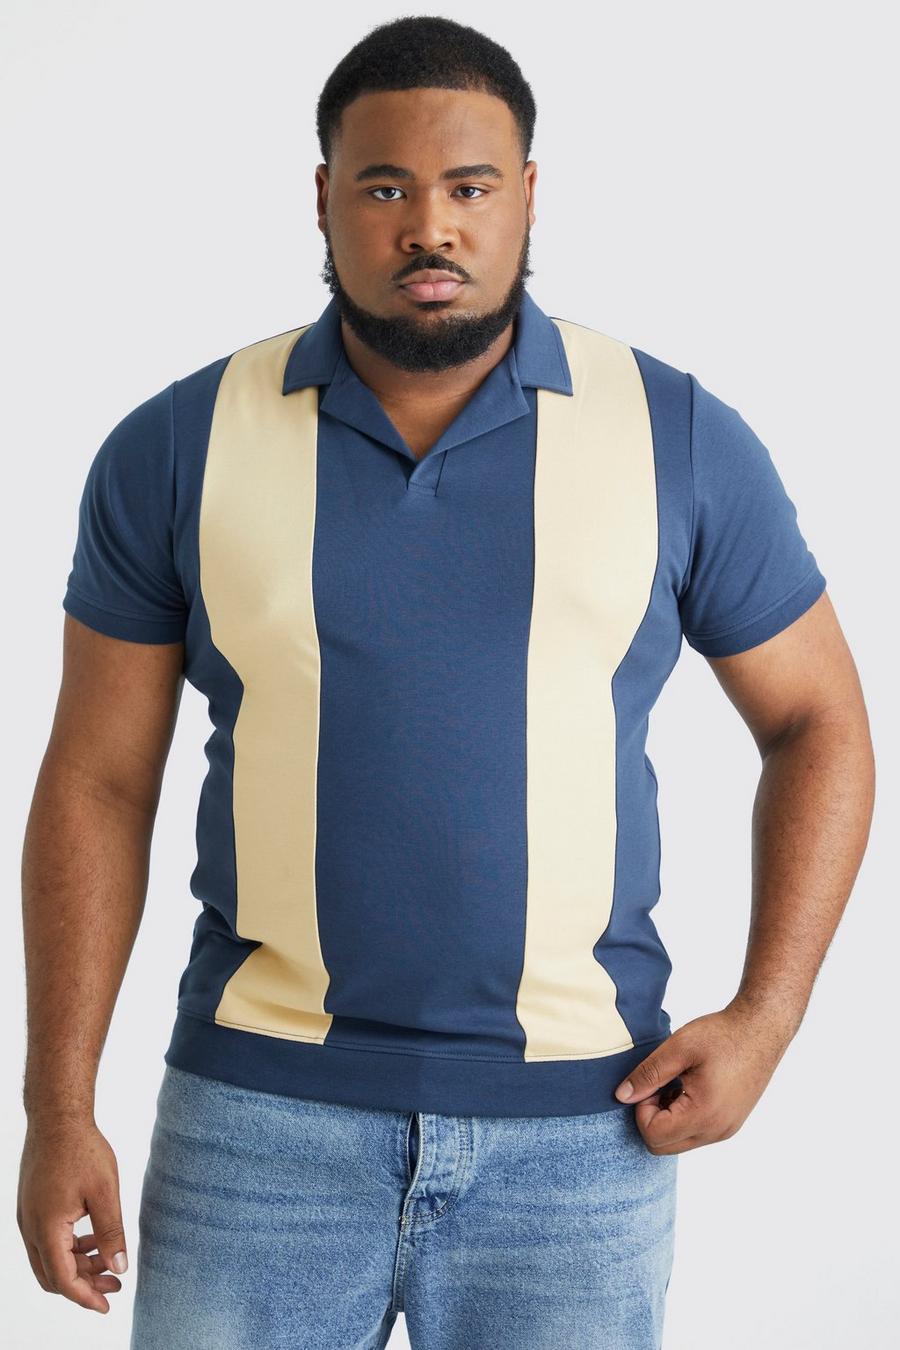 Plus Muscle-Fit Colorblock Poloshirt, Navy